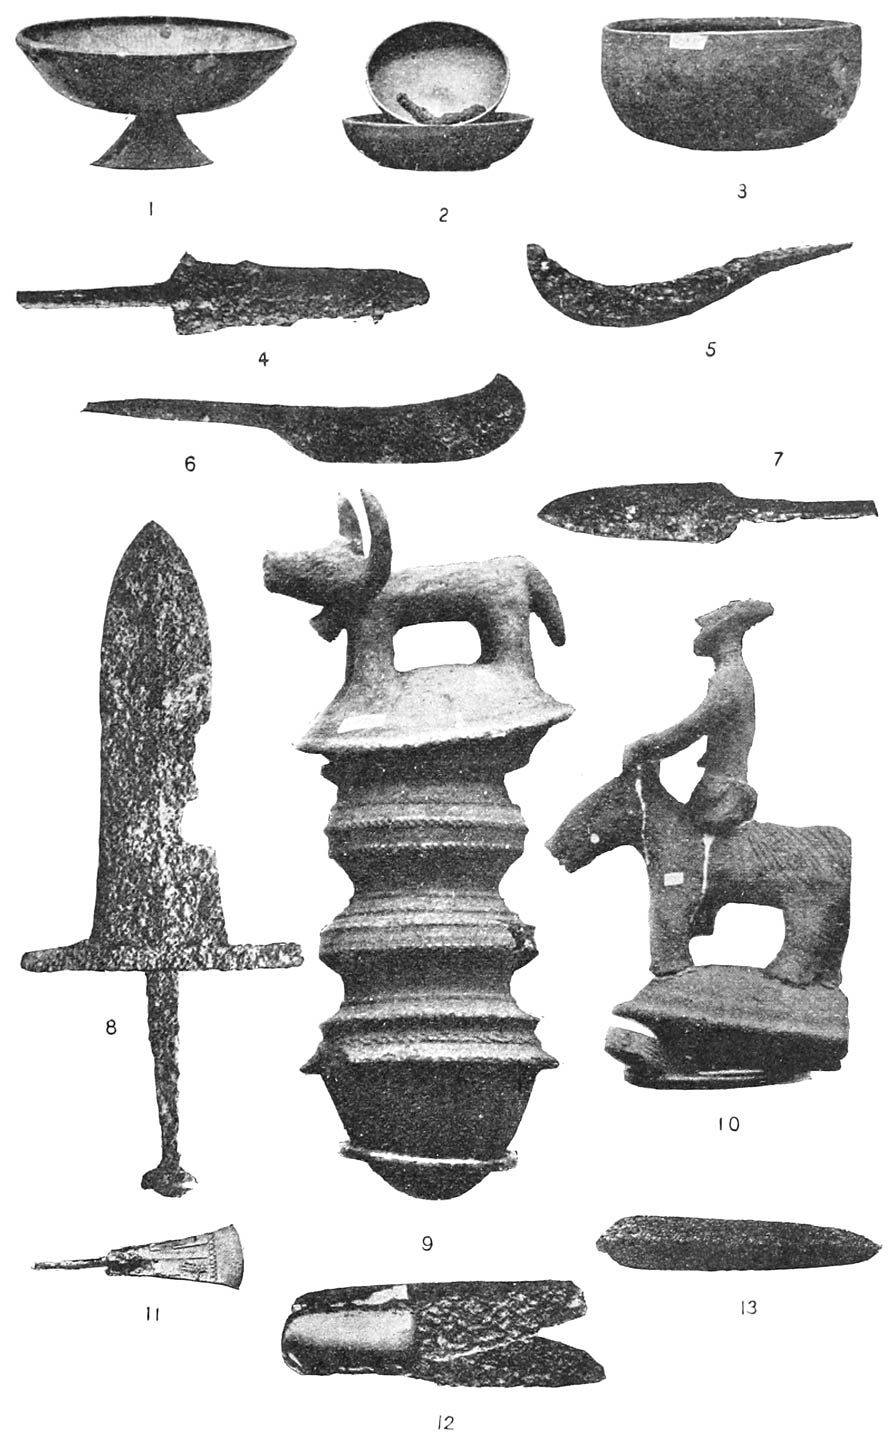 FIG. 76—VARIOUS OBJECTS FOUND IN THE NILGIRI CAIRNS, TAKEN FROM BREEKS.